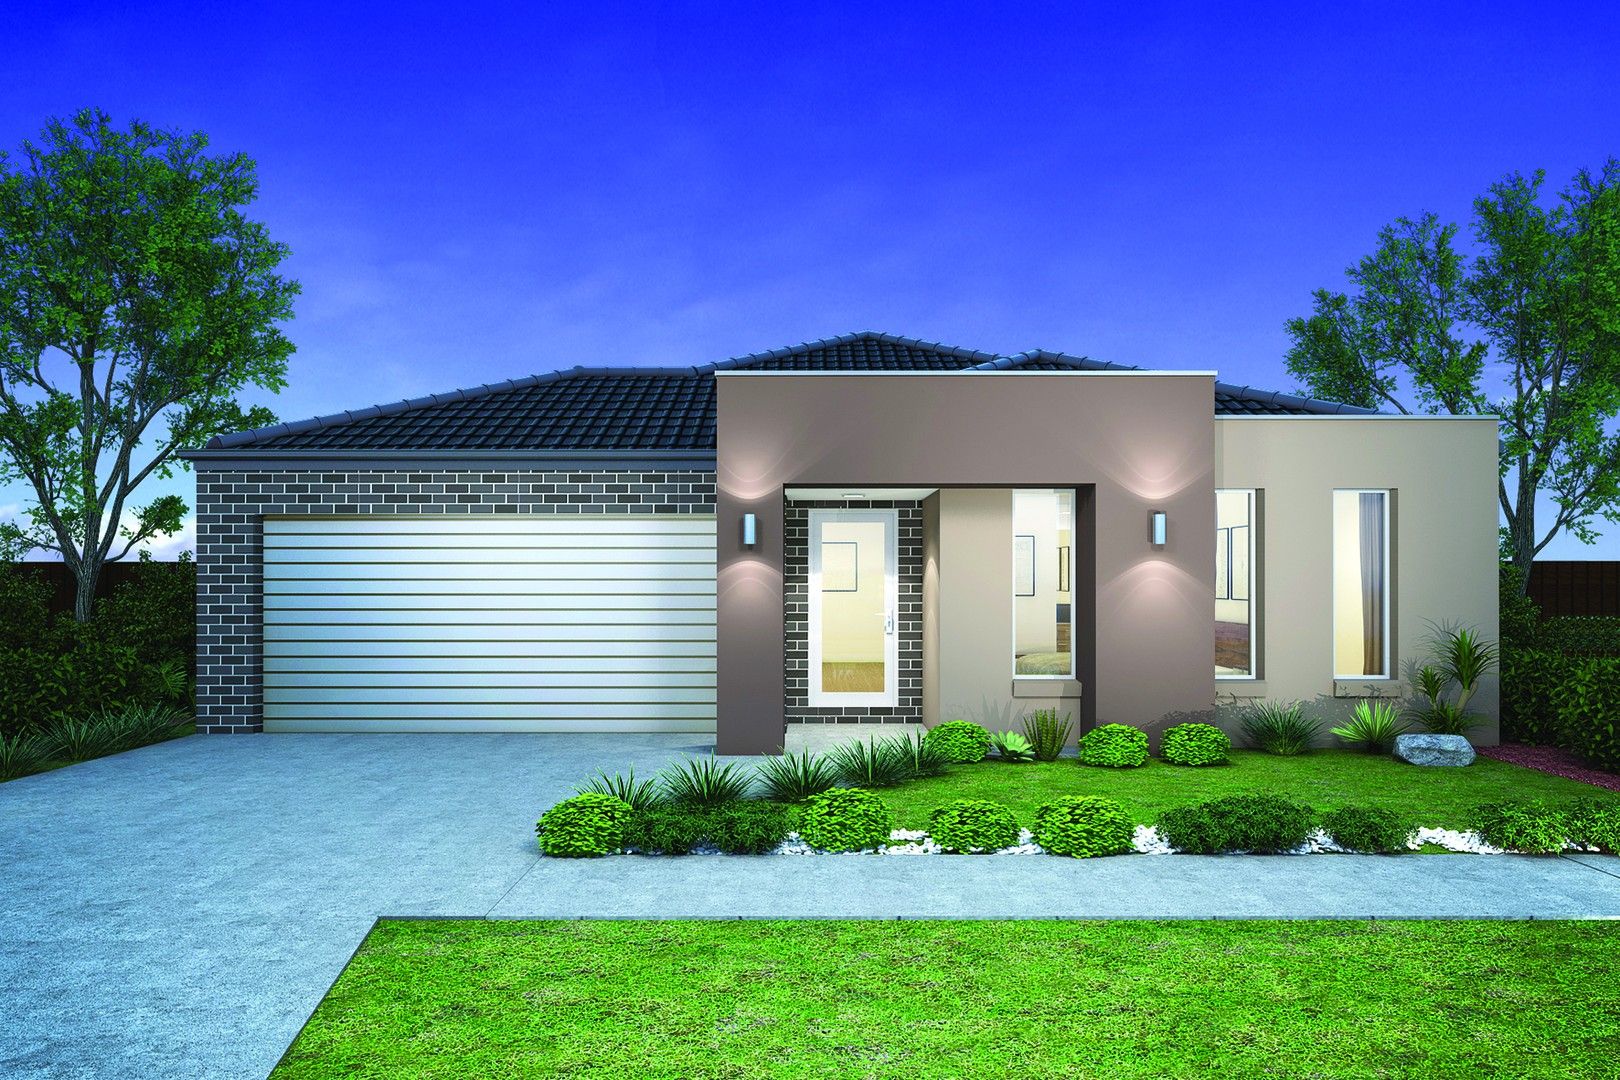 4 bedrooms New House & Land in Lot 406 Haymont Estate CHARLEMONT VIC, 3217